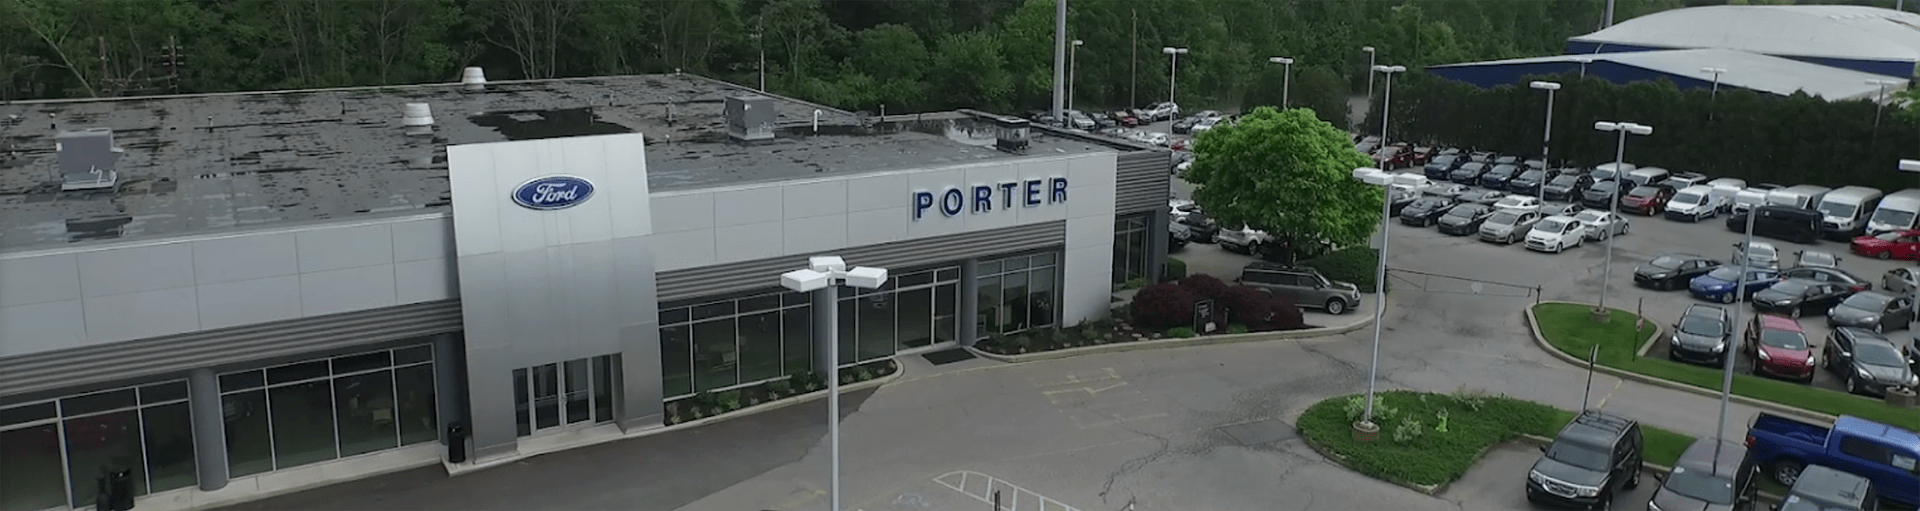 Porter Ford Windshield Wiper Blade Replacement Service